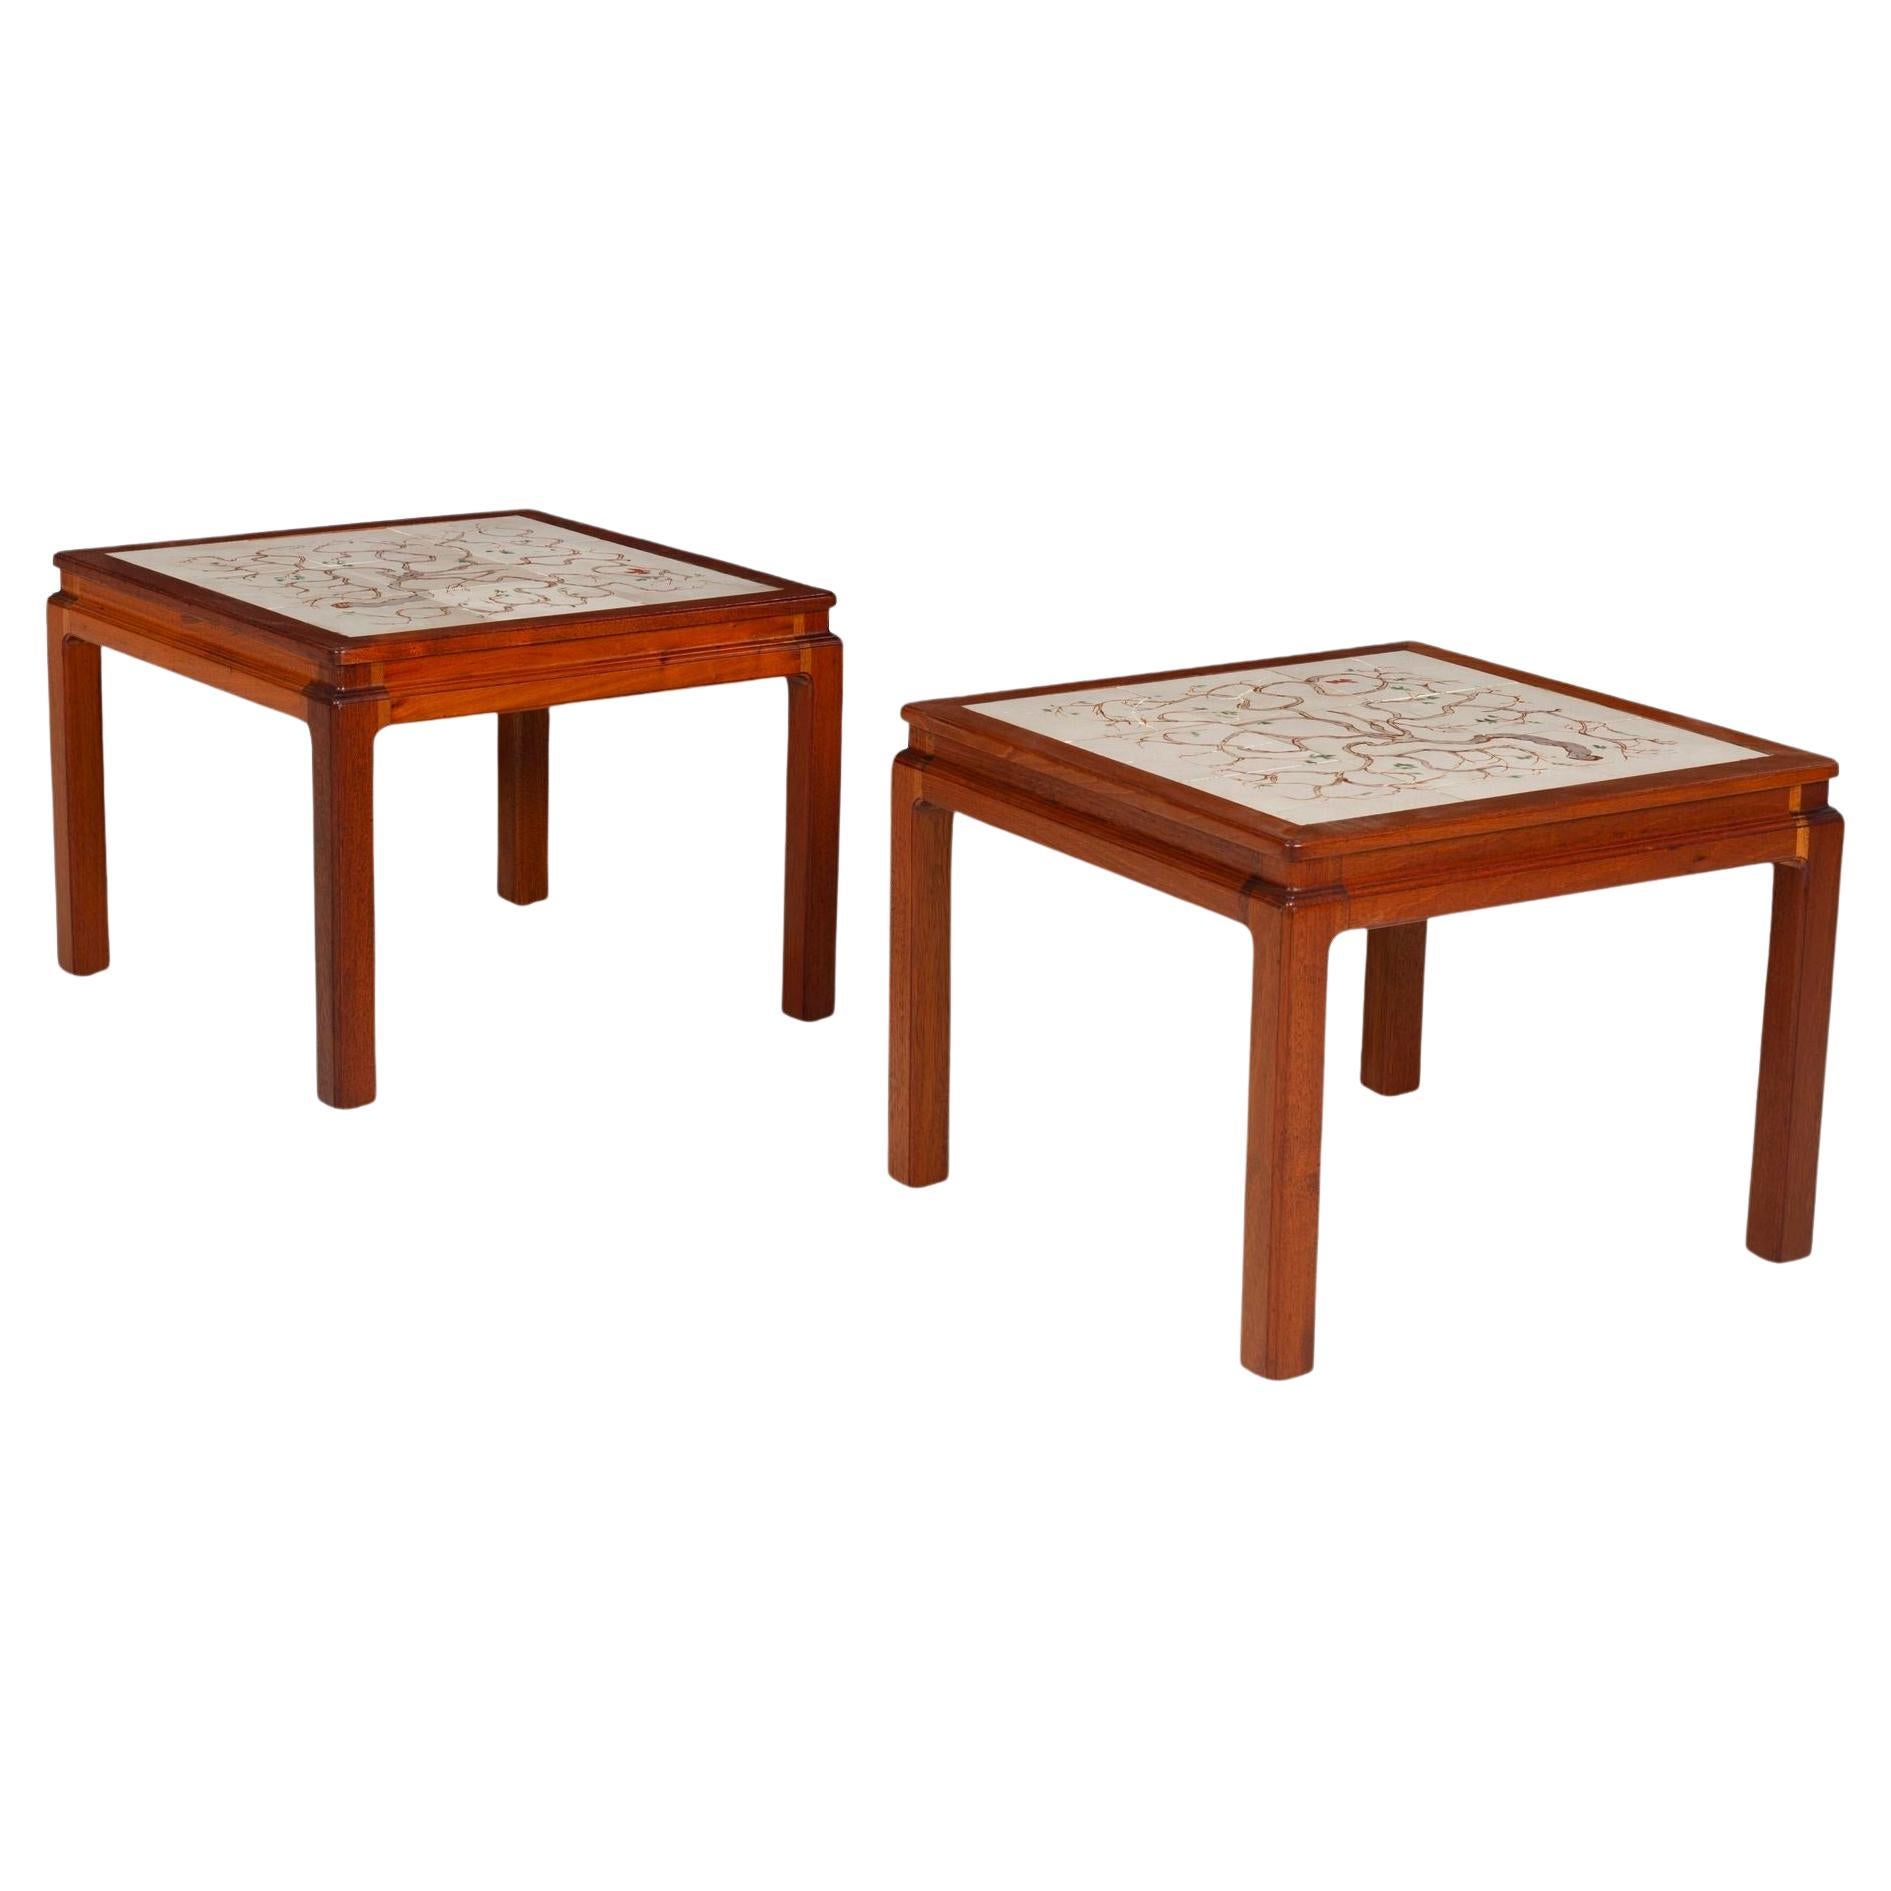 Pair of Parson End Tables by Edward Wormley for Dunbar with hand painted tiles For Sale